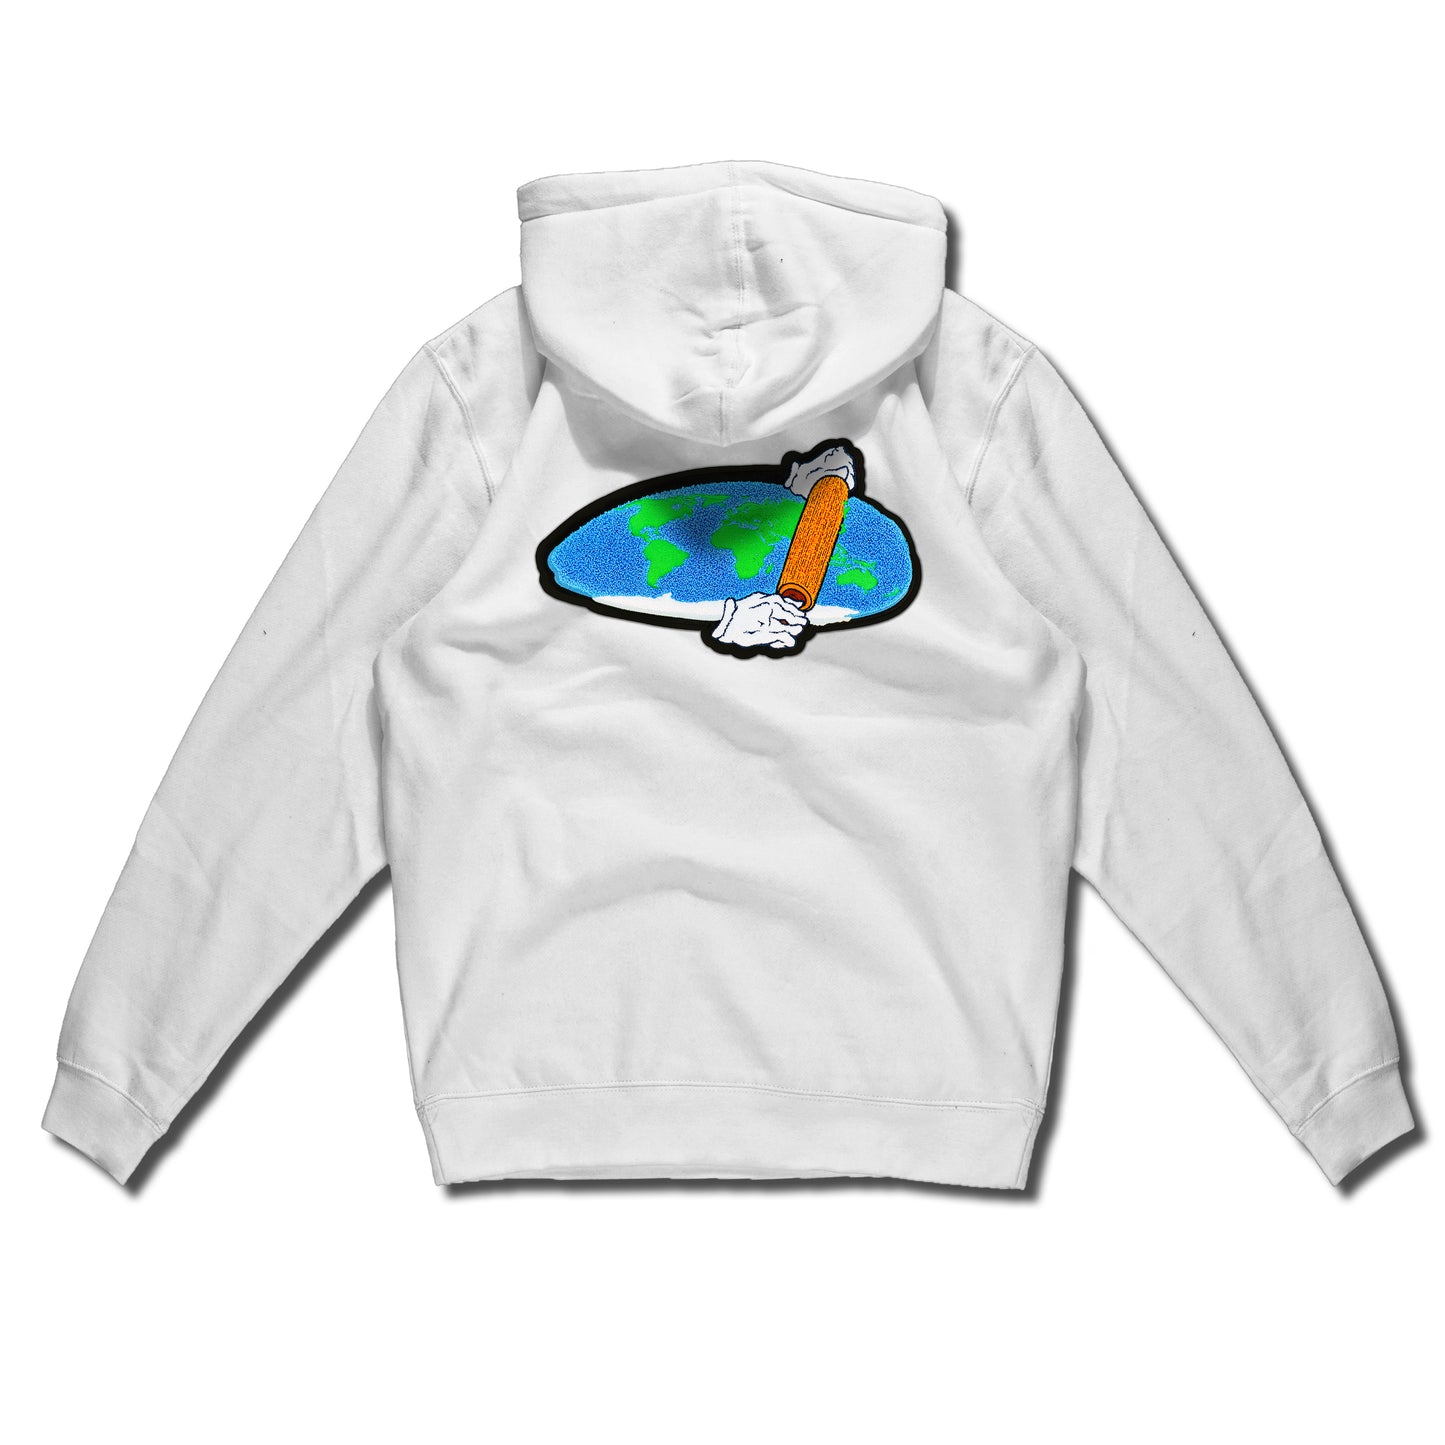 Flat Earth Theory Patch on White Hoodie